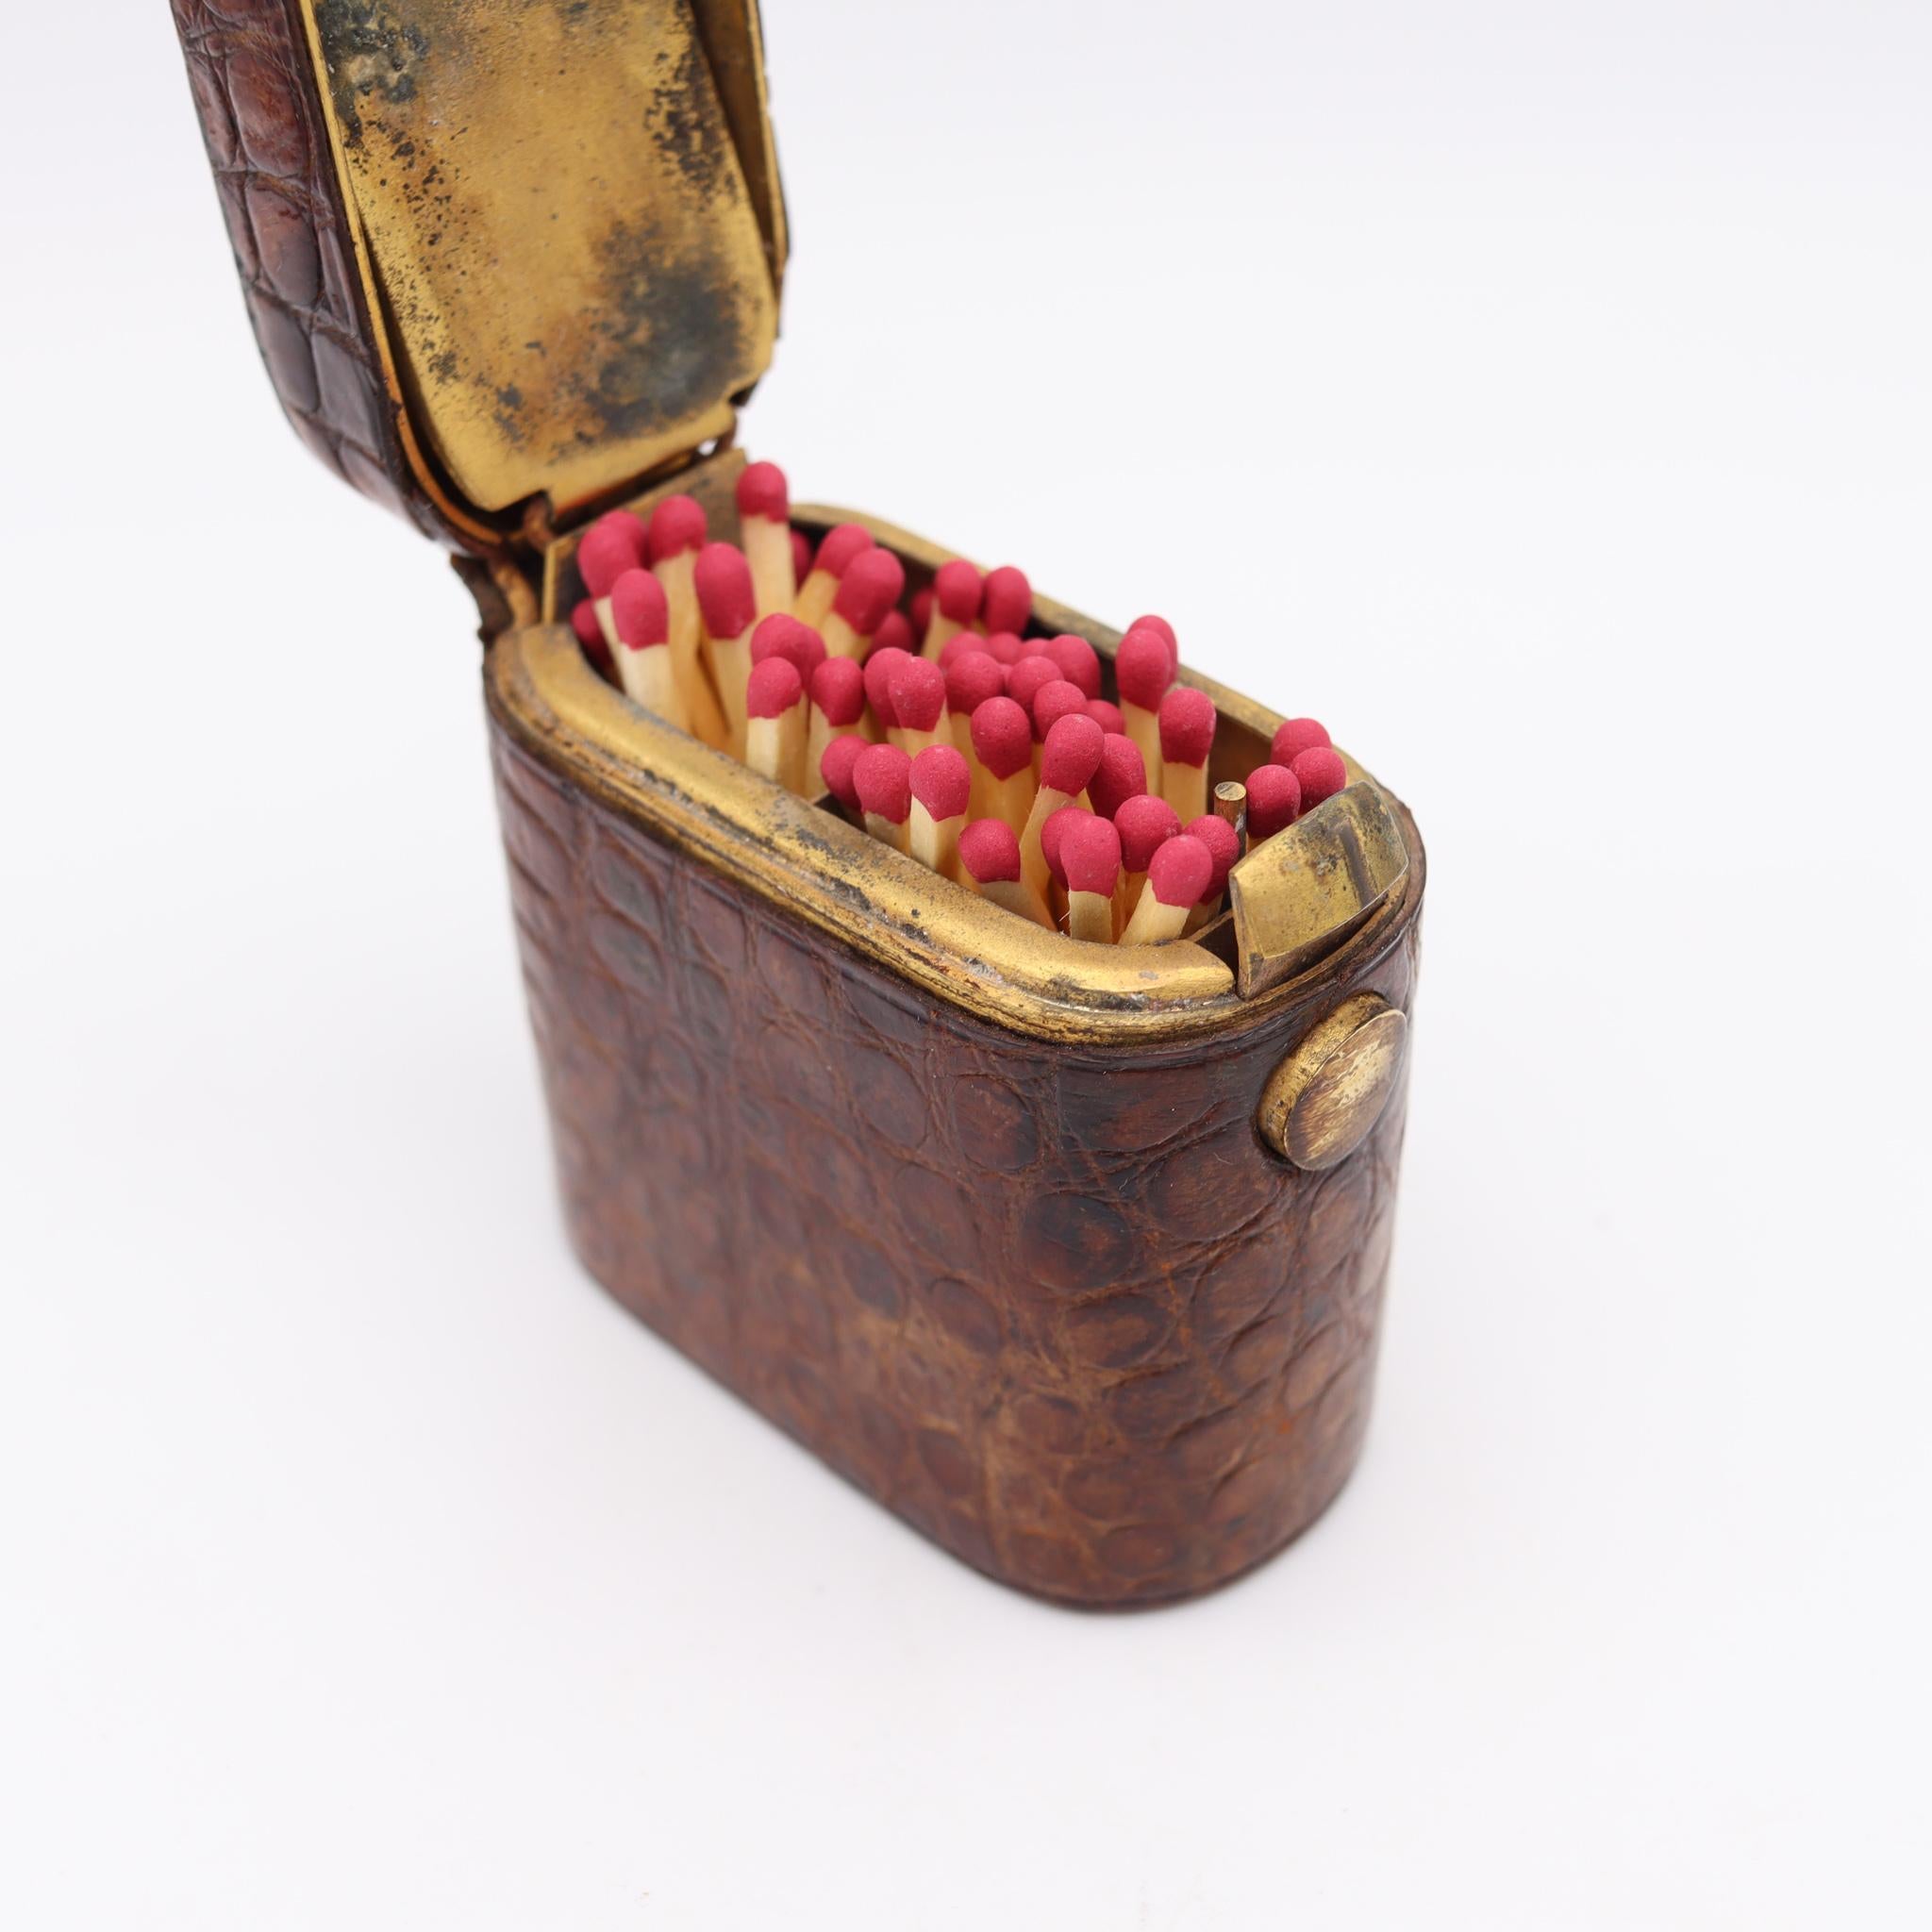 Edwardian desk matches box with crocodile leather.

Beautiful and very unusual box, created in England during the Edwardian period, back in the 1905. This is a very decorative matches holder desk box crafted in bronze and carefully embellished